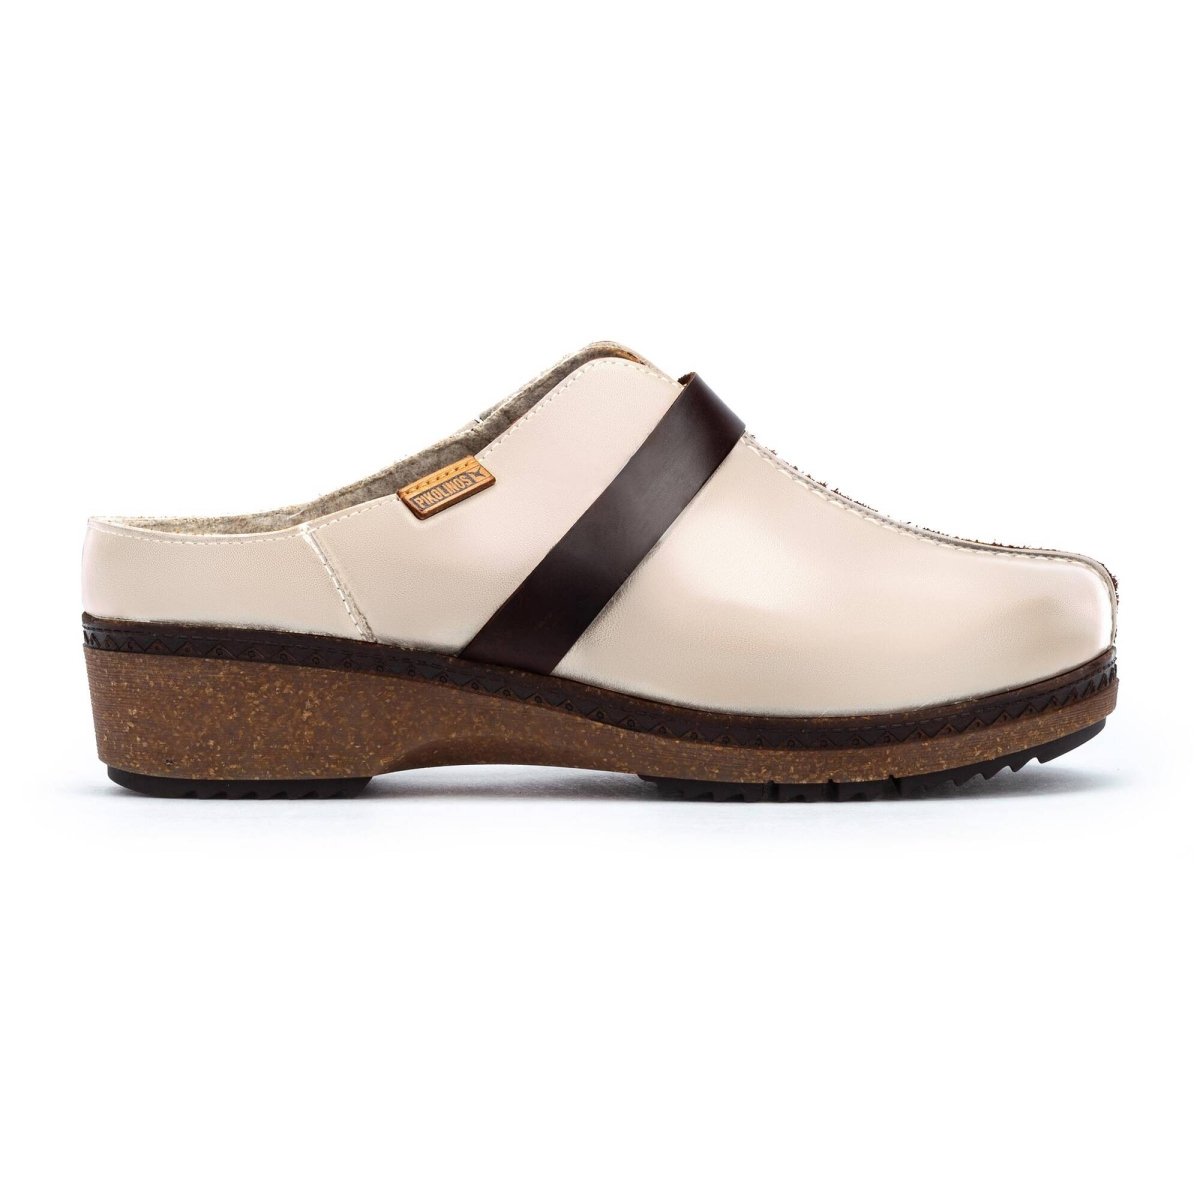 PIKOLINOS GRANADA W0W-3590C1 WOMEN'S LOAFERS CLOG SHOES IN MARFIL - TLW Shoes